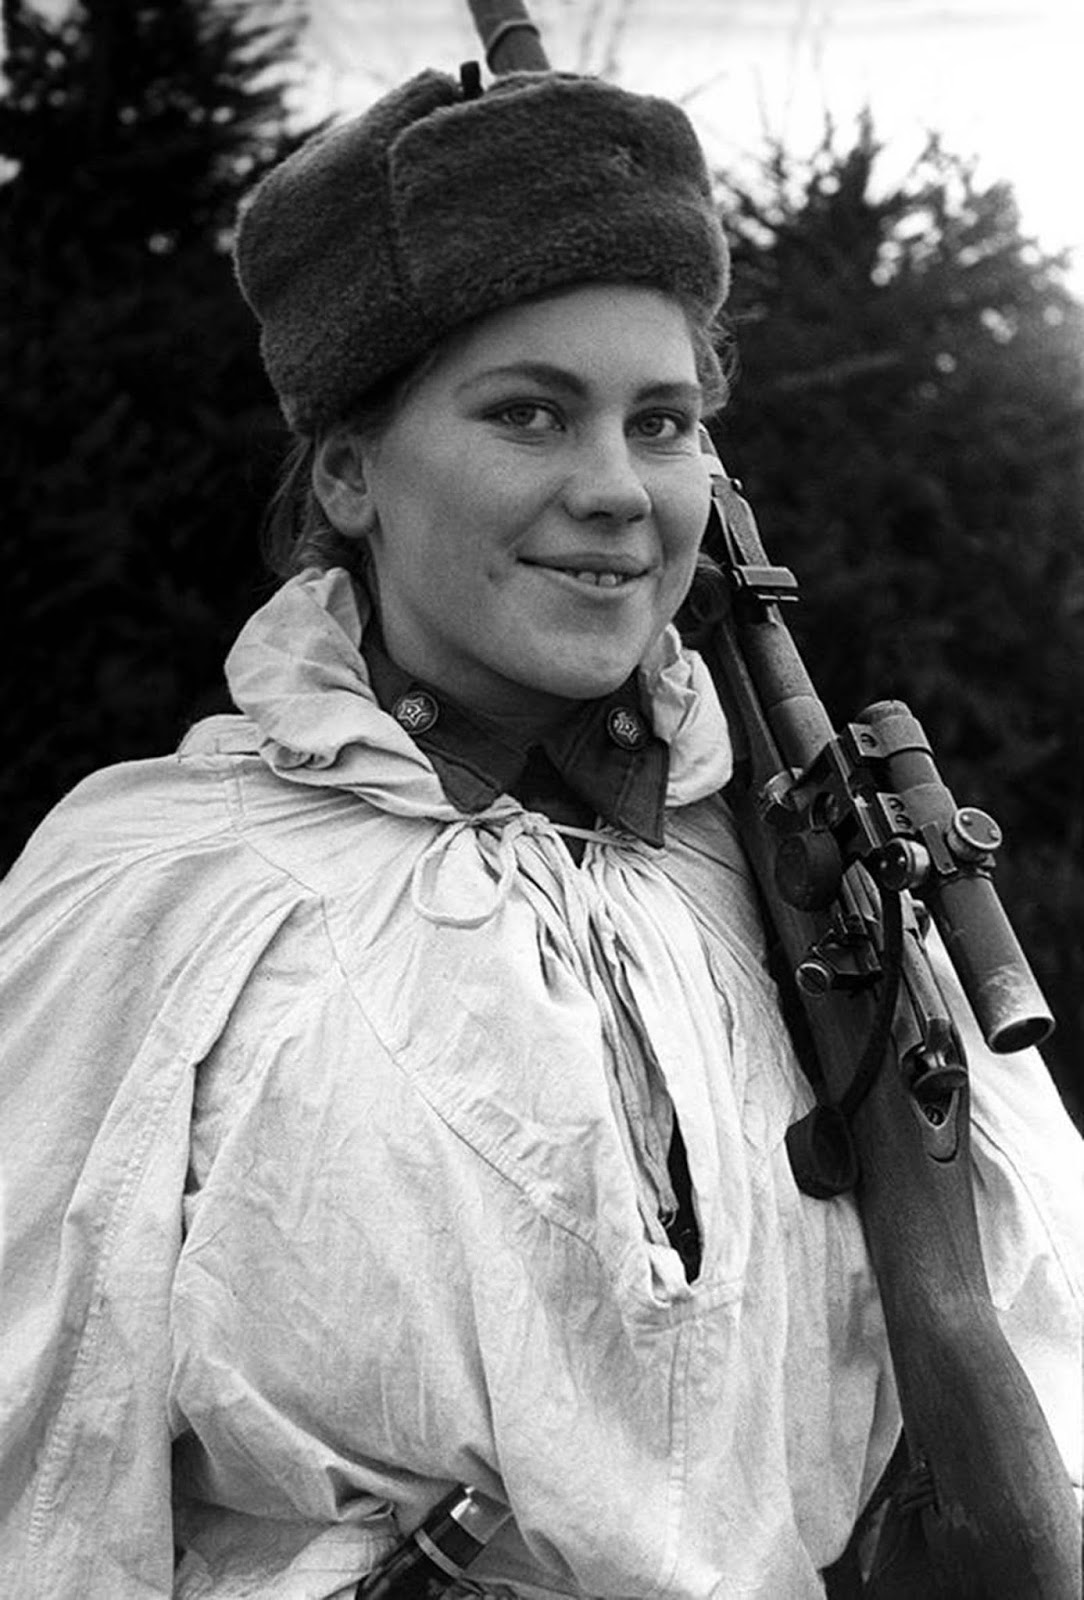 For her actions in the battle for the village of Kozyi Gory (Smolensk Oblast), Shanina was awarded her first military distinction, the Order of Glory 3rd Class on 17 April 1944.